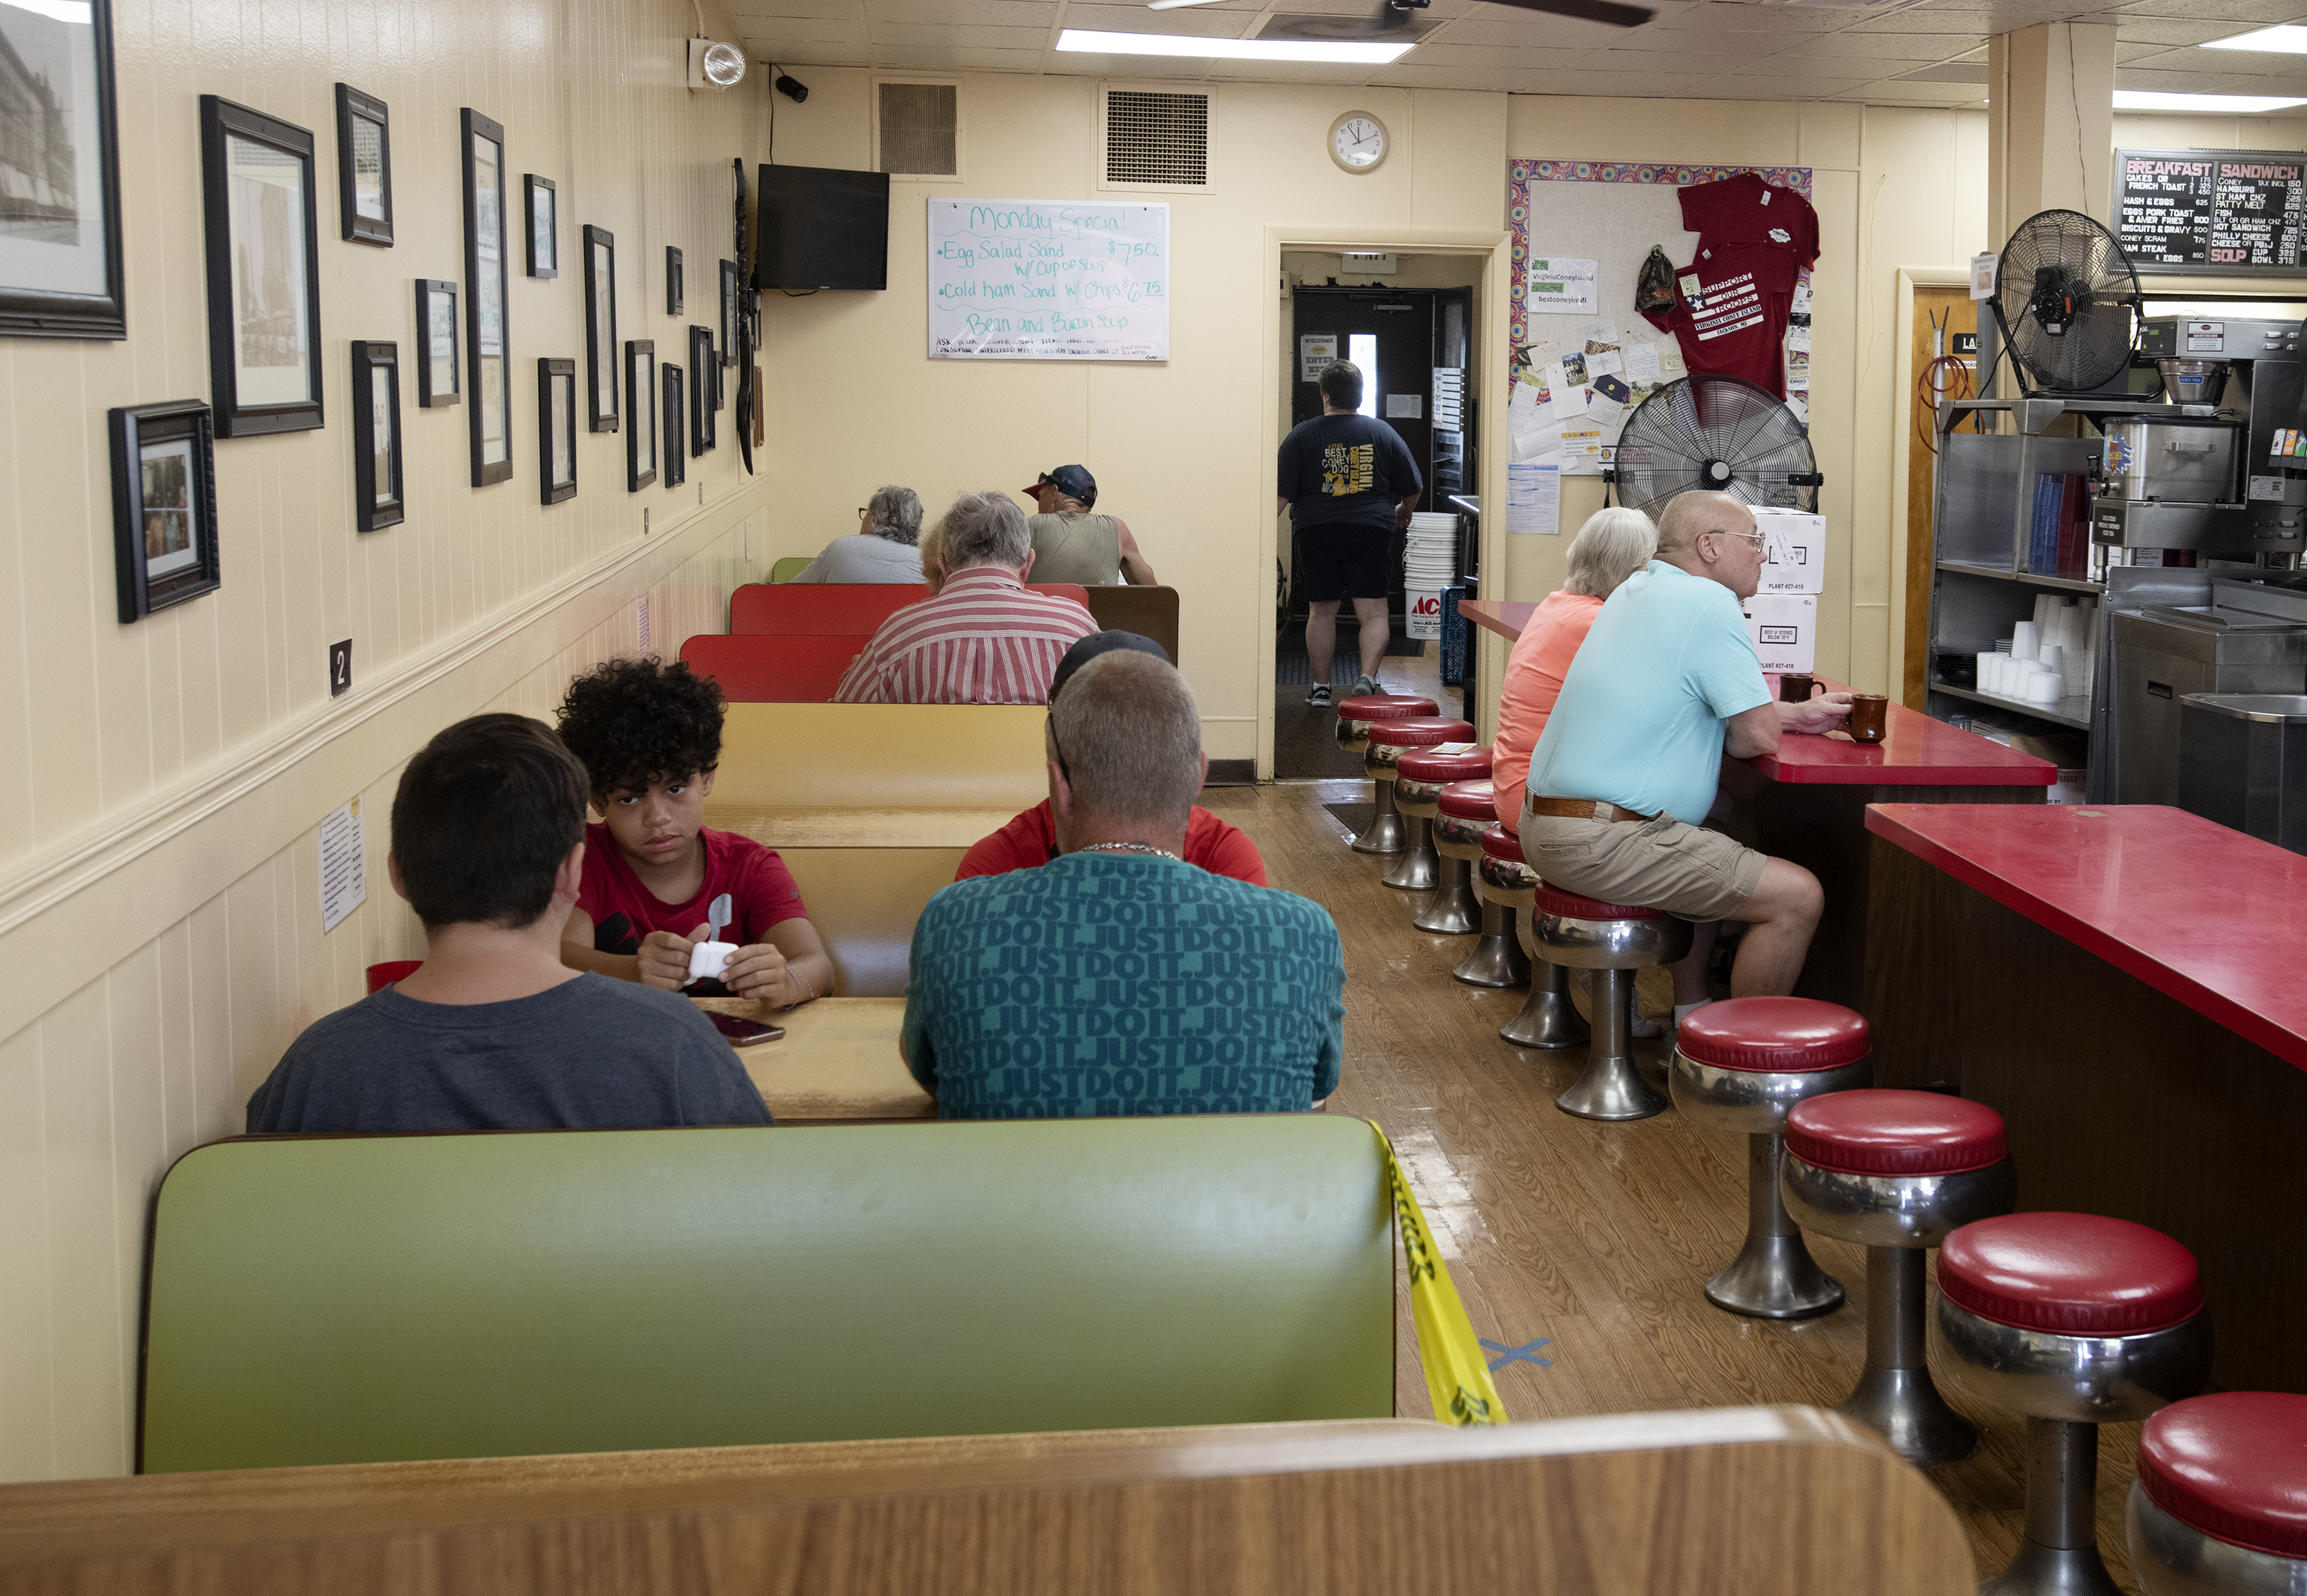 Customers sit at Virginia Coney Island, 649 E. Michigan Ave., on Monday, July 6, 2020. The restaurant has been serving the Jackson community since 1914.